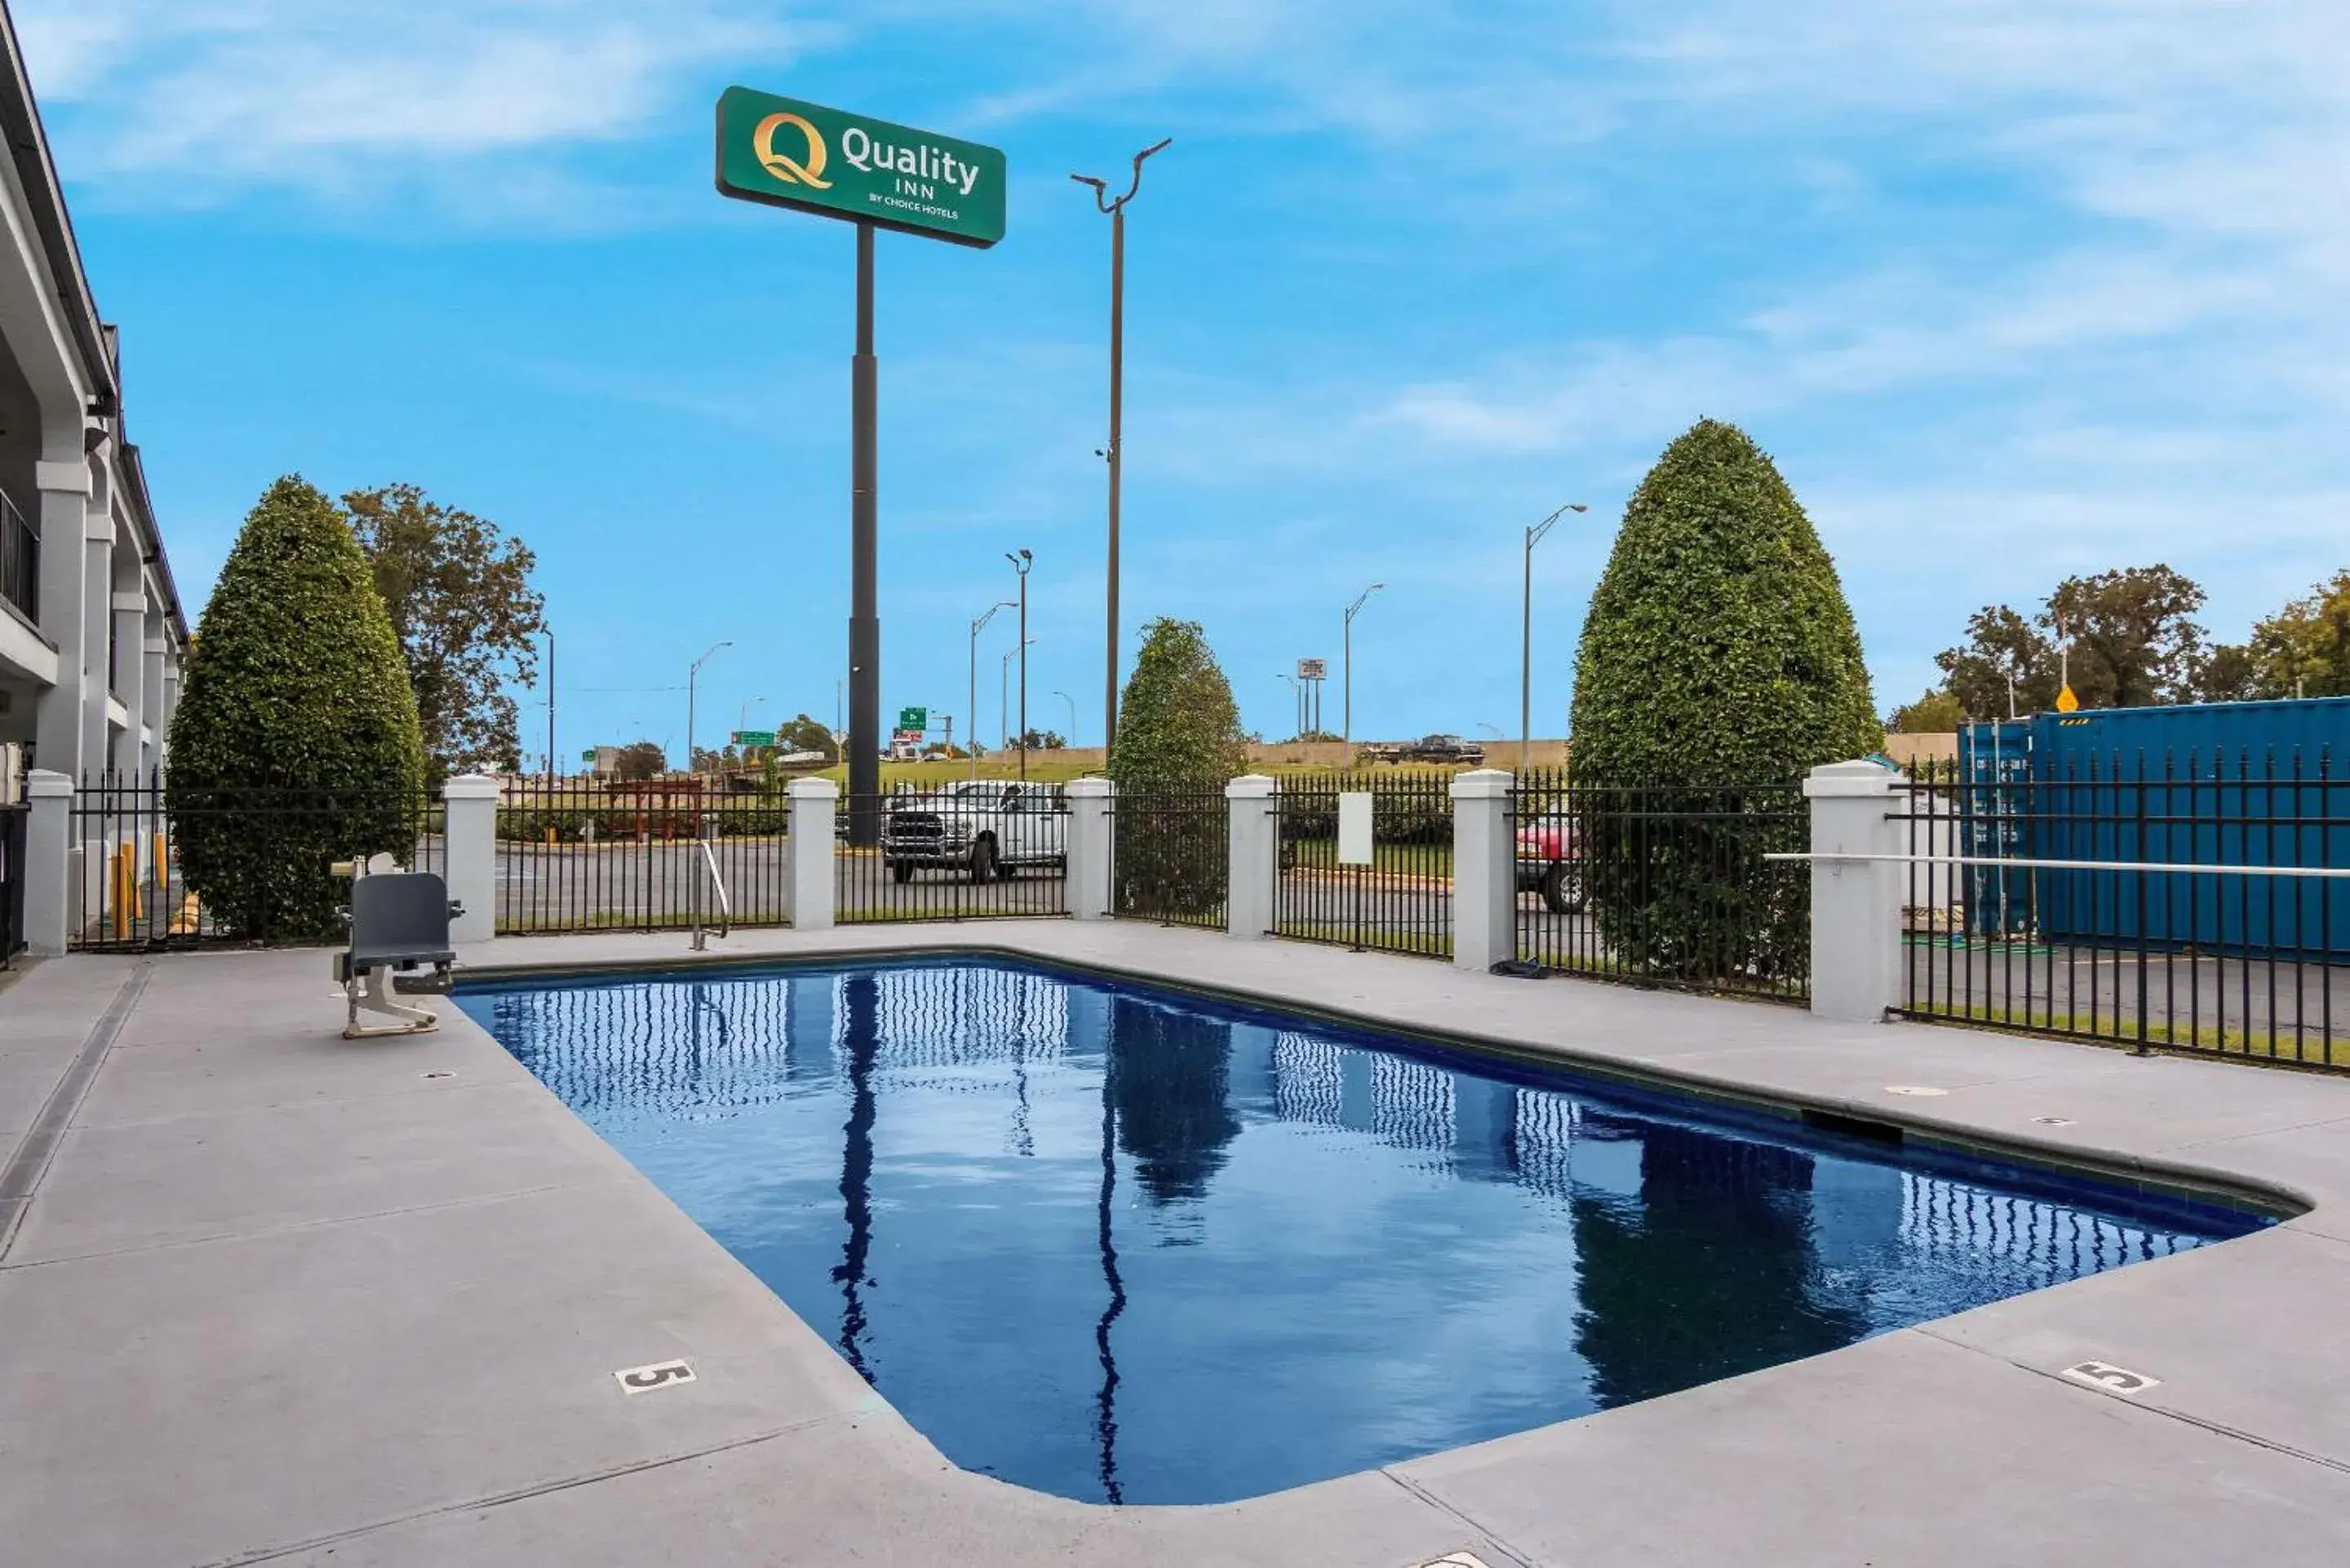 Swimming Pool in Quality Inn near Casinos and Convention Center